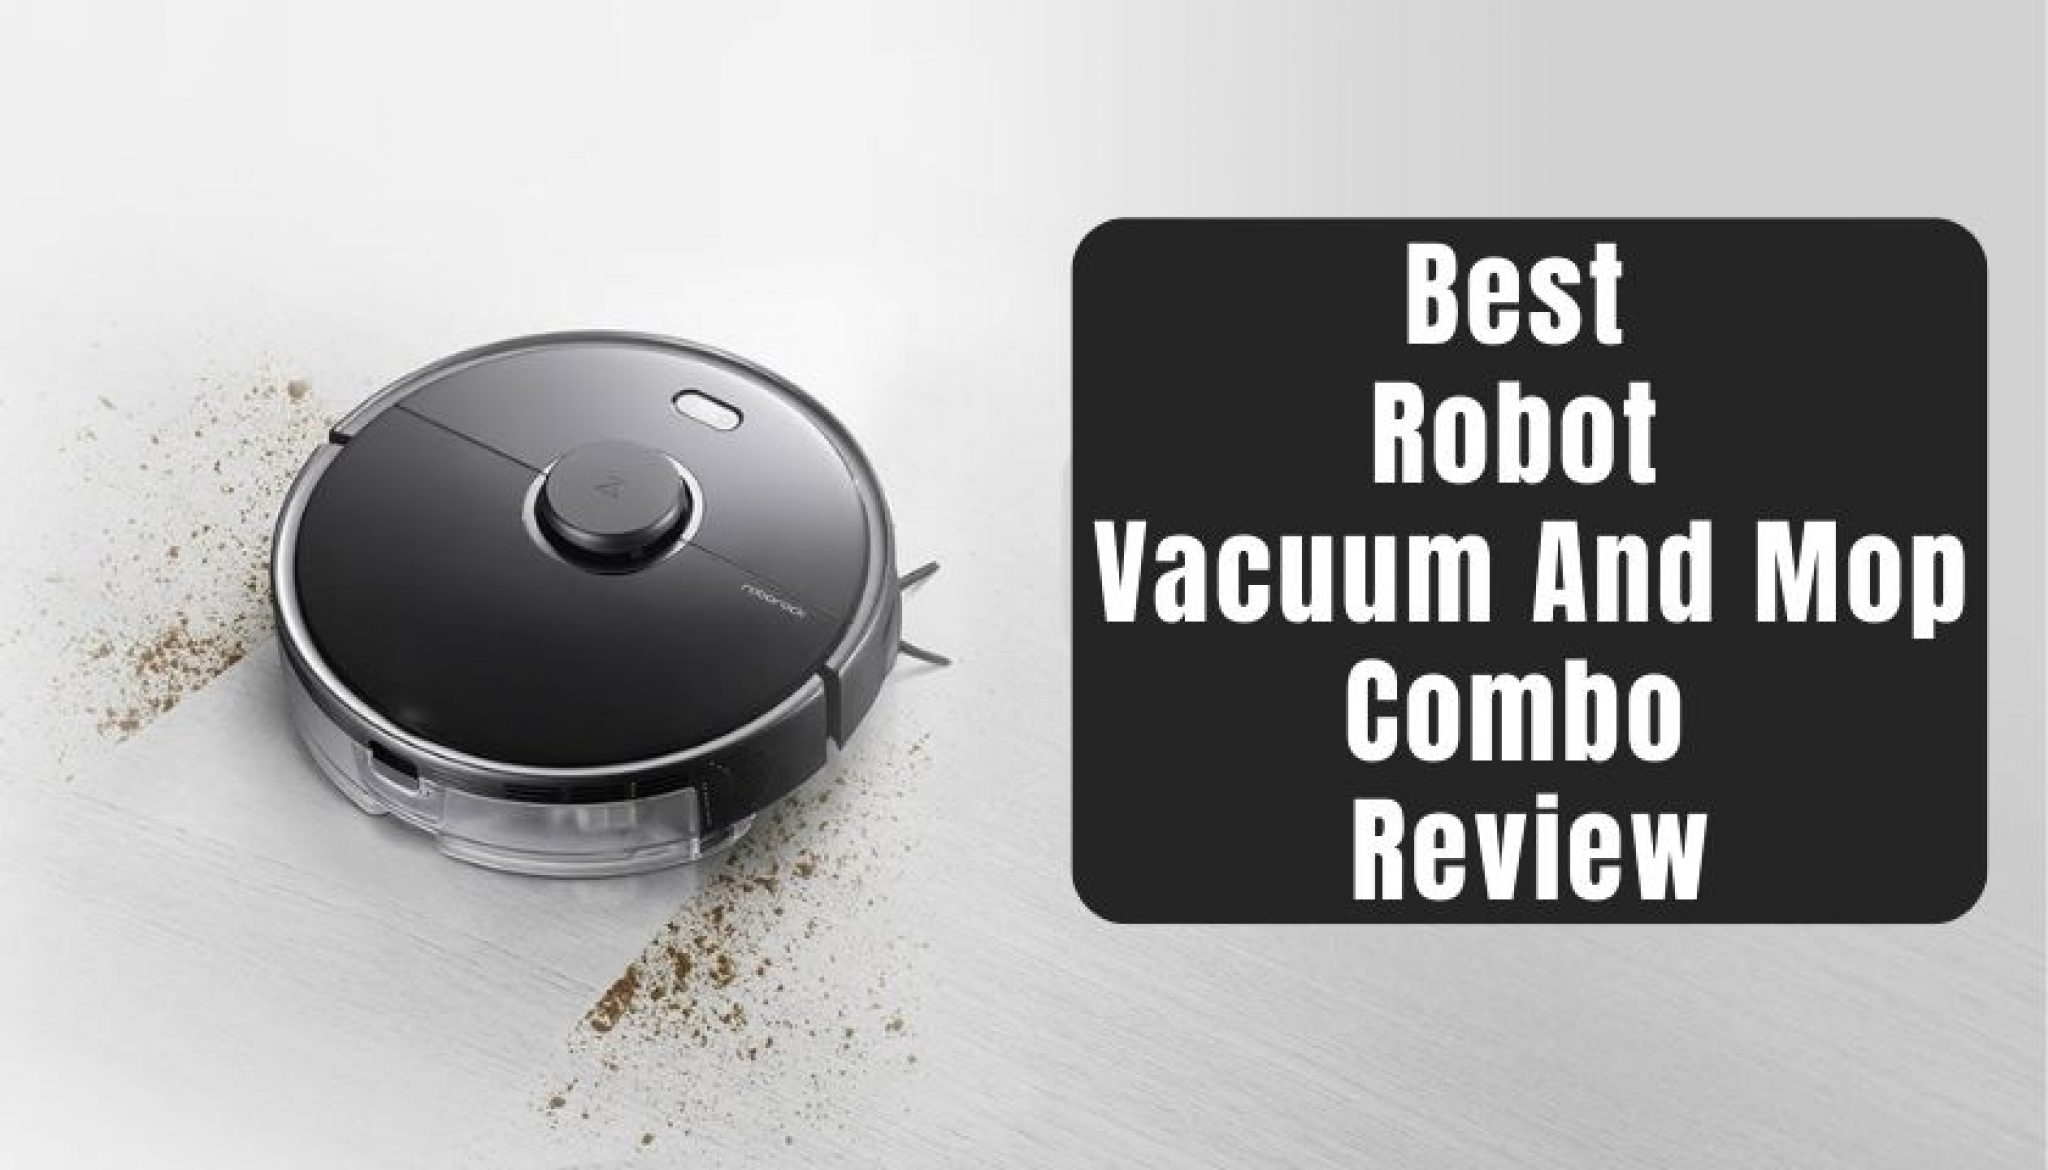 10 Best Robot Vacuum And Mop Combo Review